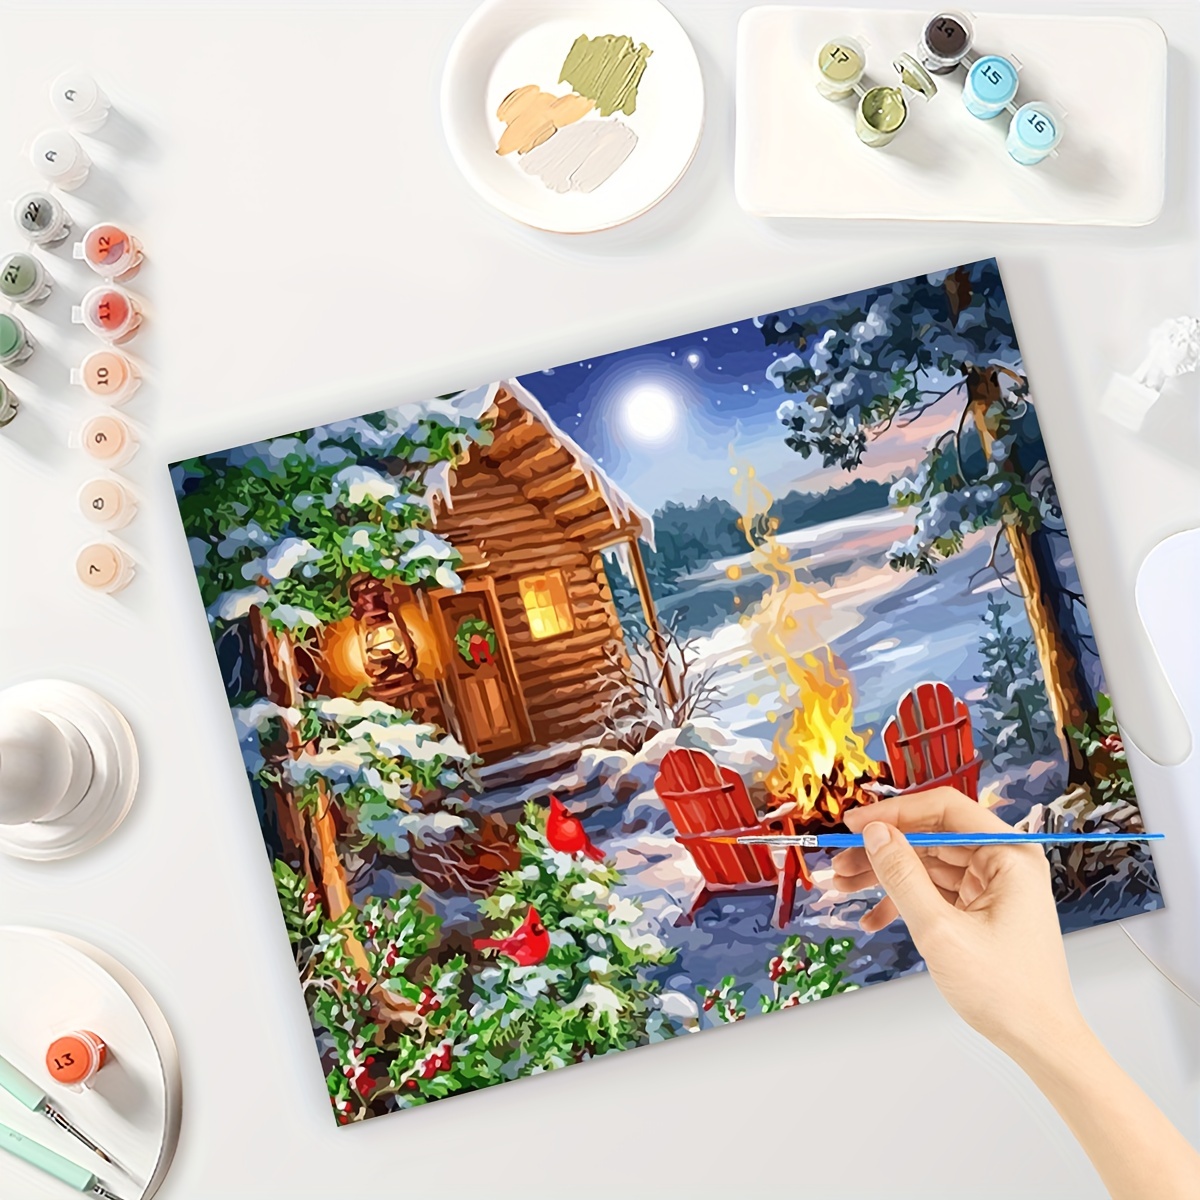 Snow Mountain PAINT by NUMBER DIY Kit for Adult & Kids, Waterfall Vintage  Style Art , Easy Beginner Acrylic Painting Kit,home Decor Gift 